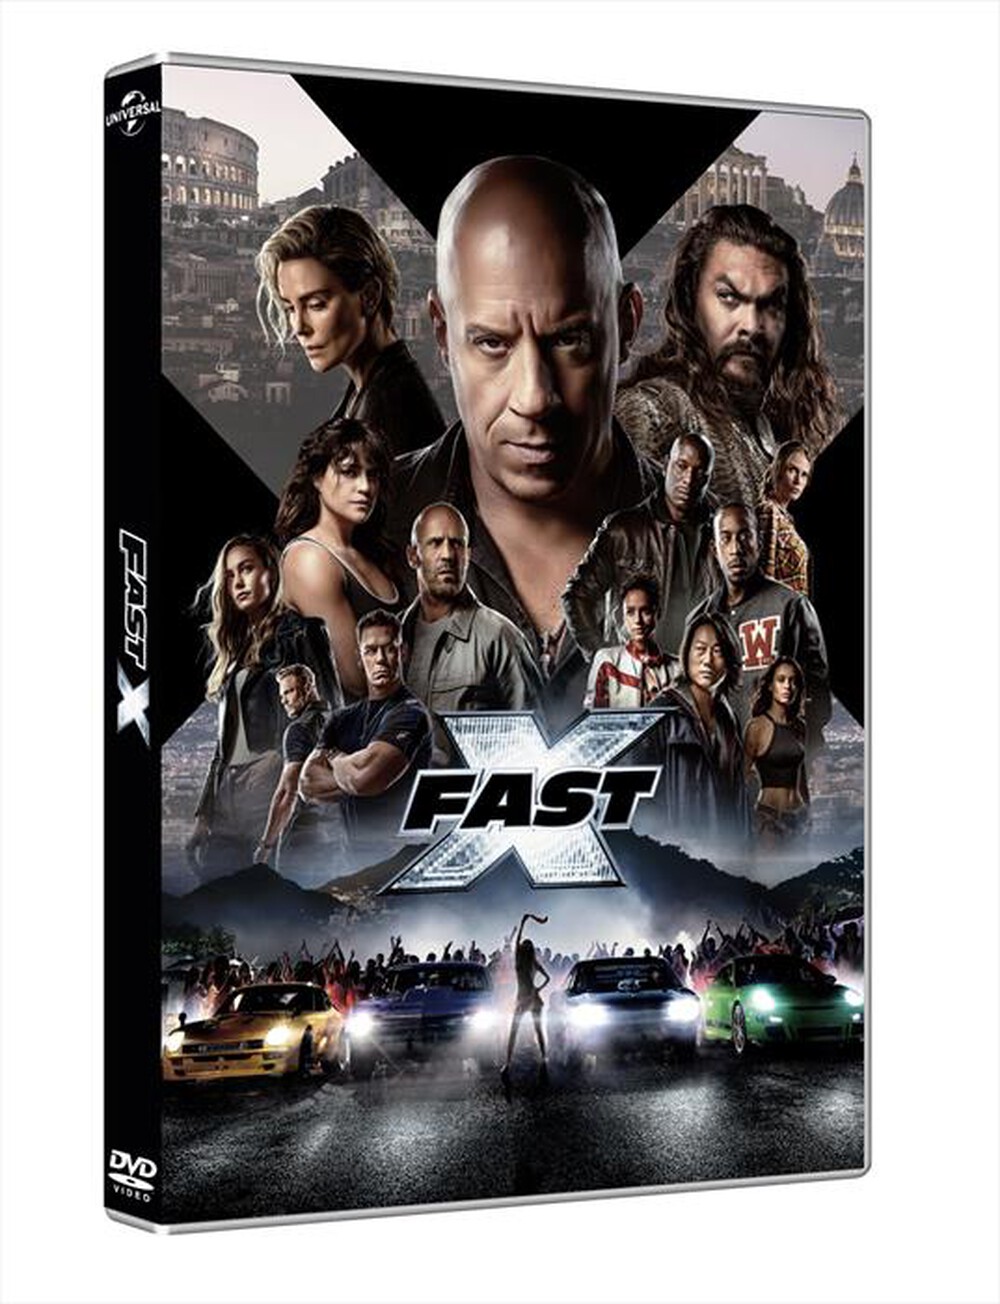 "UNIVERSAL PICTURES - Fast X"